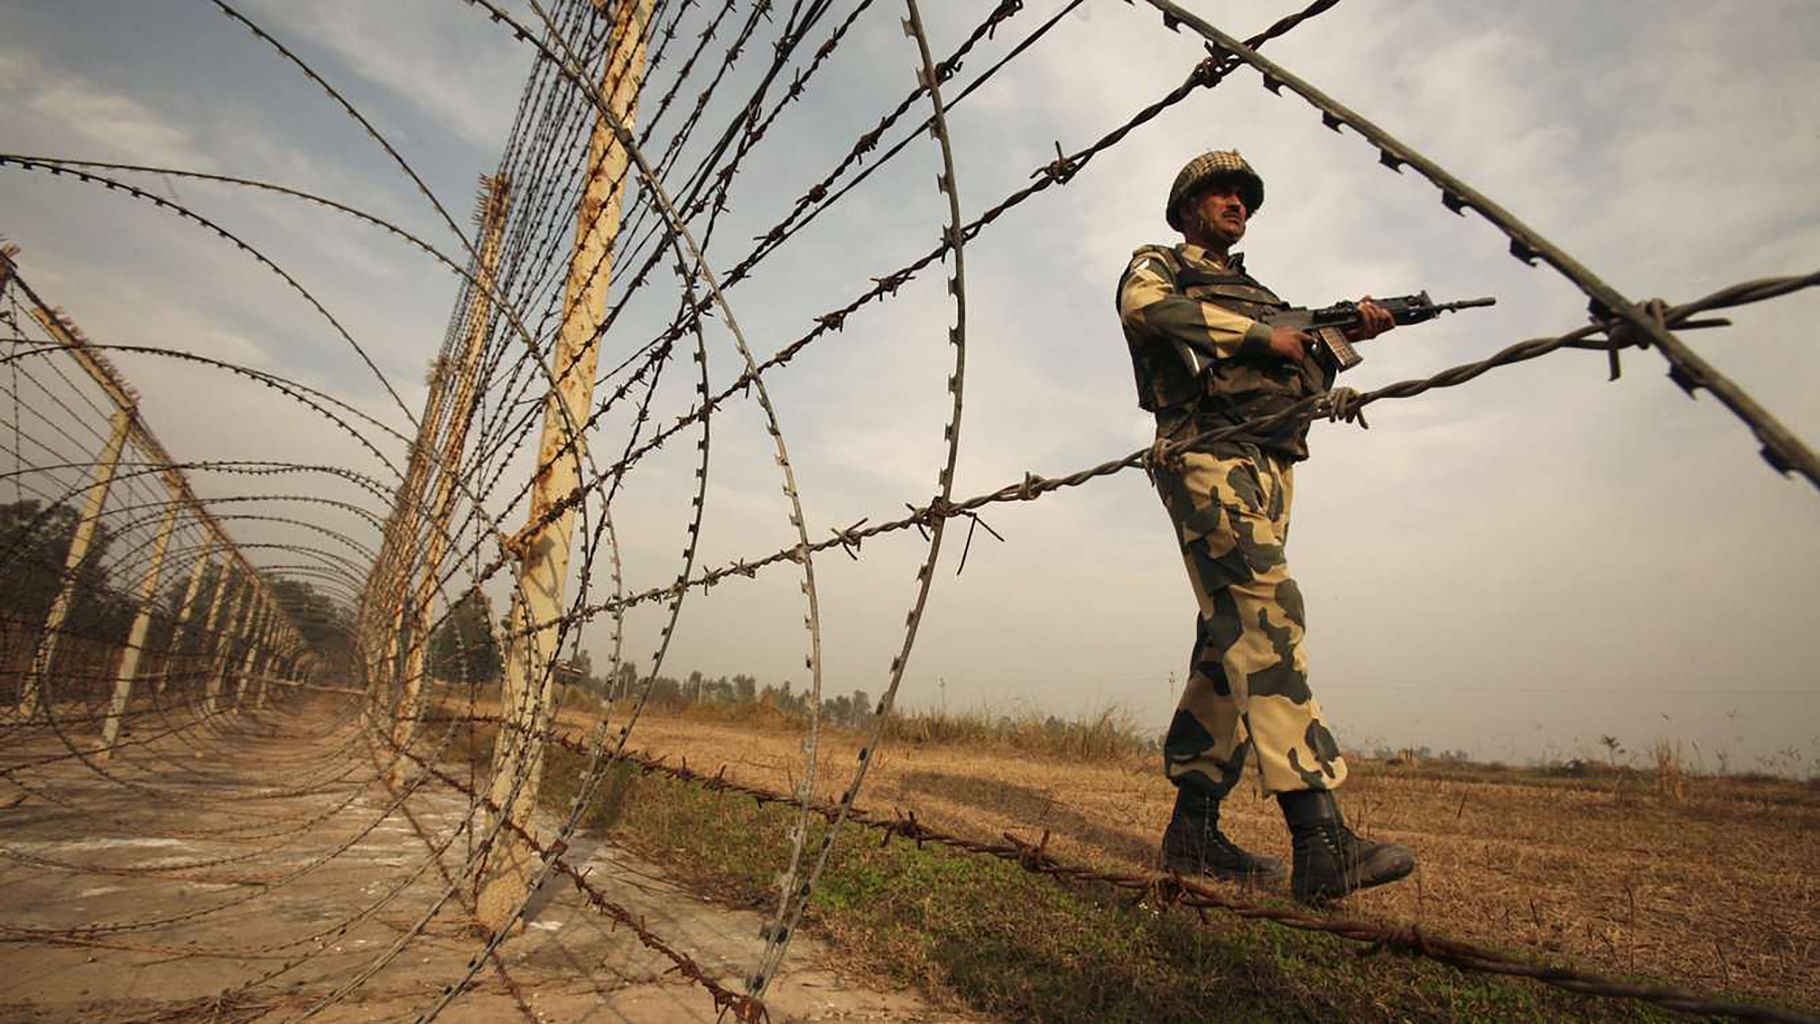 An Indian Border Security Force soldier patrols the fenced border with Pakistan. (Photo: Reuters)